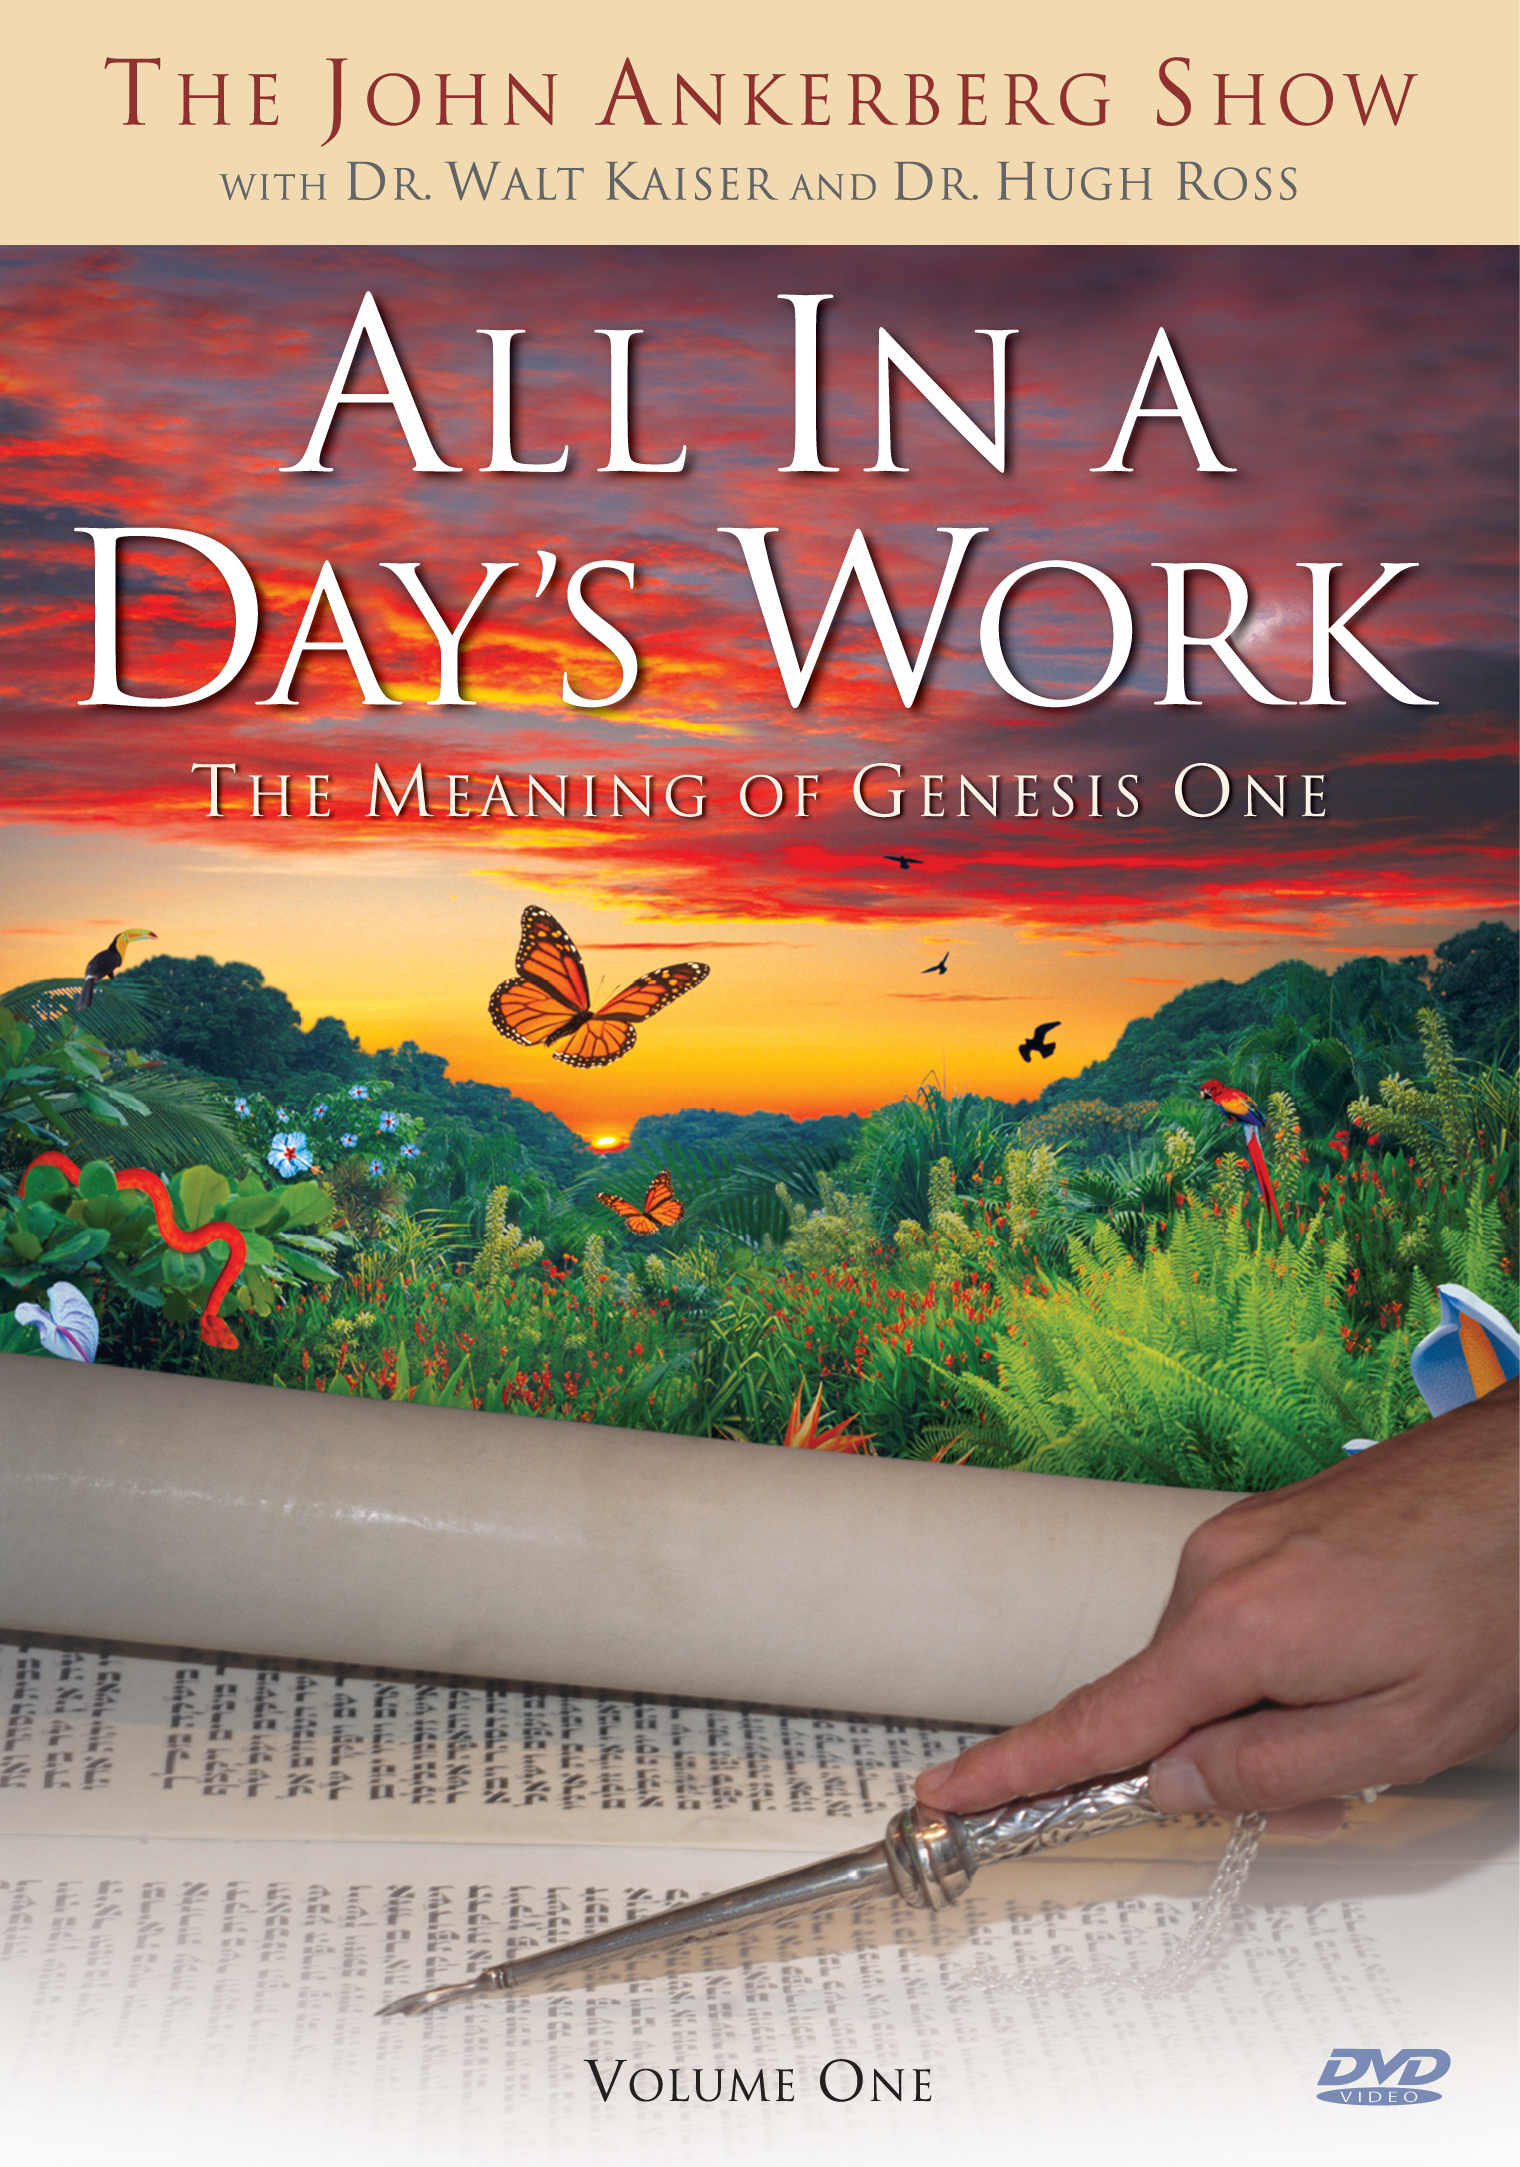 All in a Day's Work: The Meaning of Genesis One Image